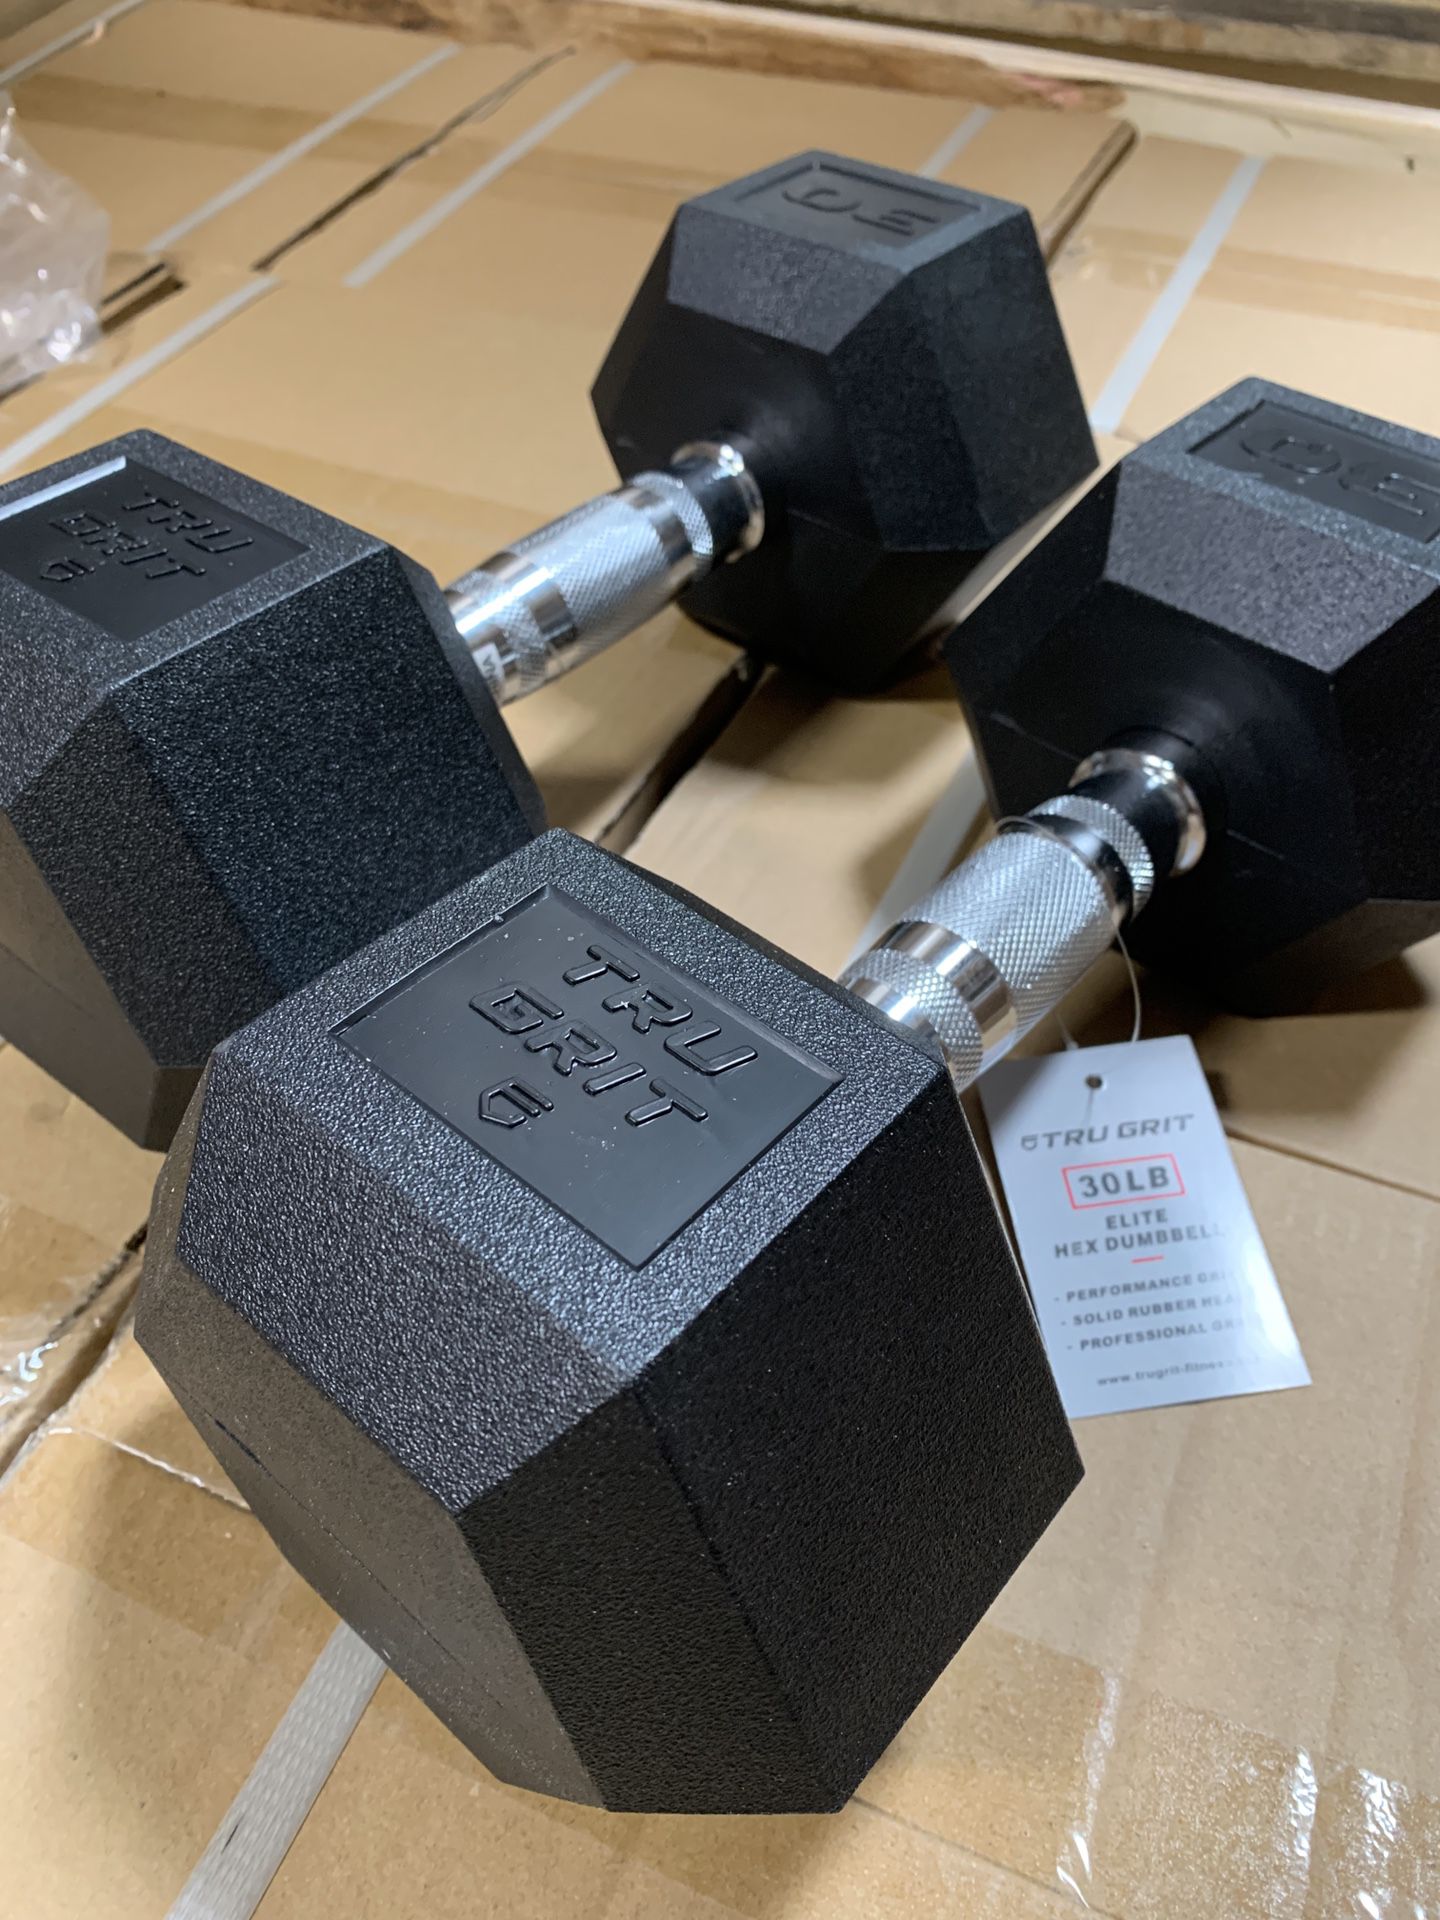 Sale, Brand New Rubber Hex Dumbbells 30lbs Set $1 Per Pound